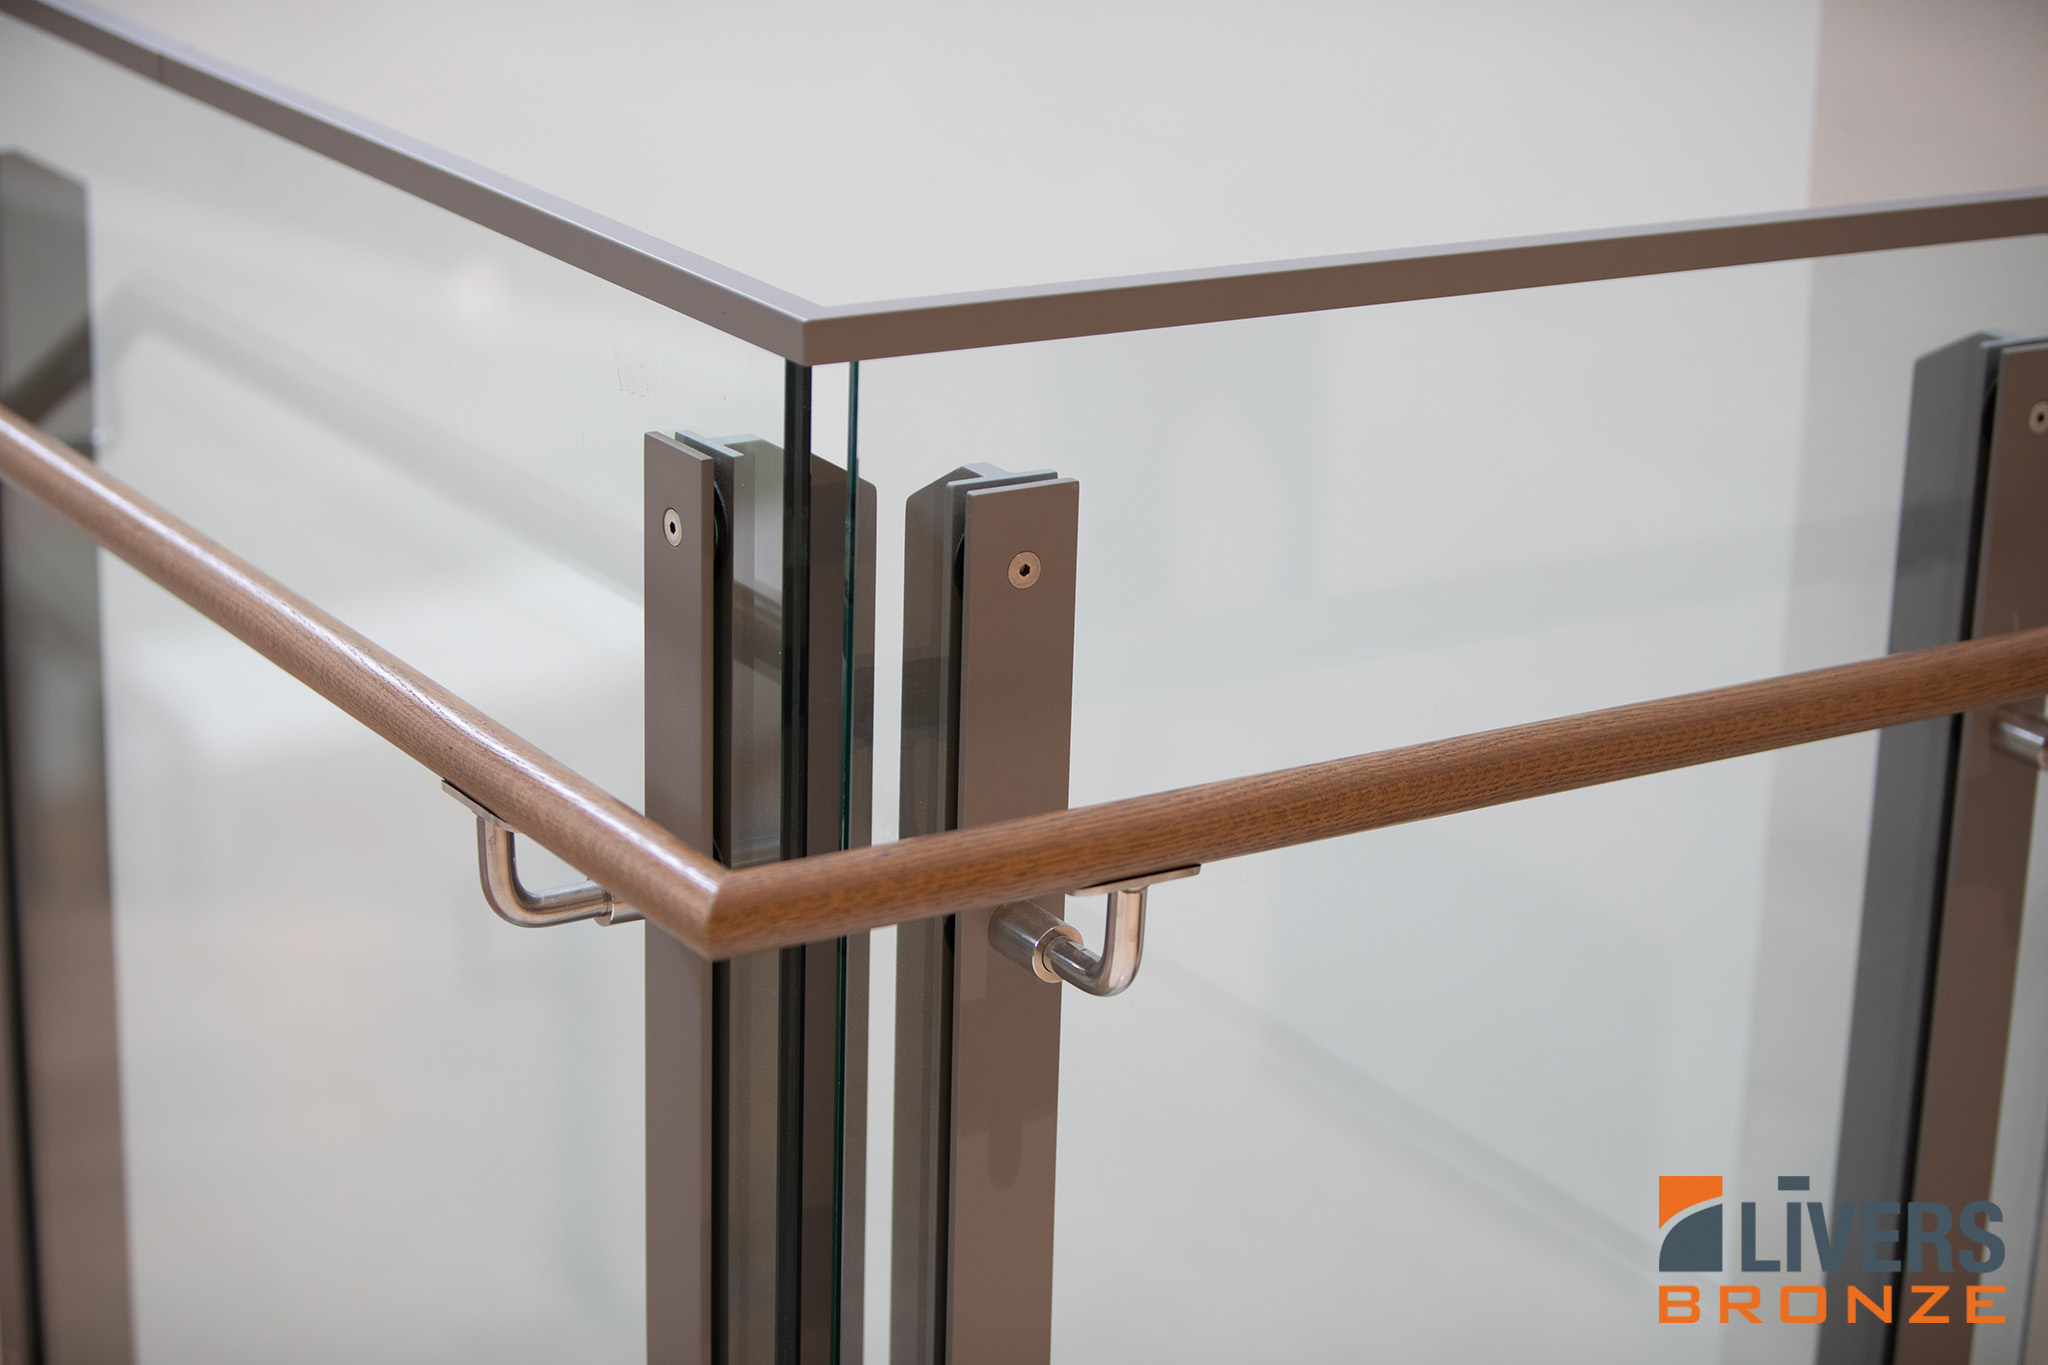 Livers Bronze Belmont Powder Coated Steel Railings were installed at the Lobby Stair and Interior Ramp at the US Court House in San Antonio Texas and were made in the USA